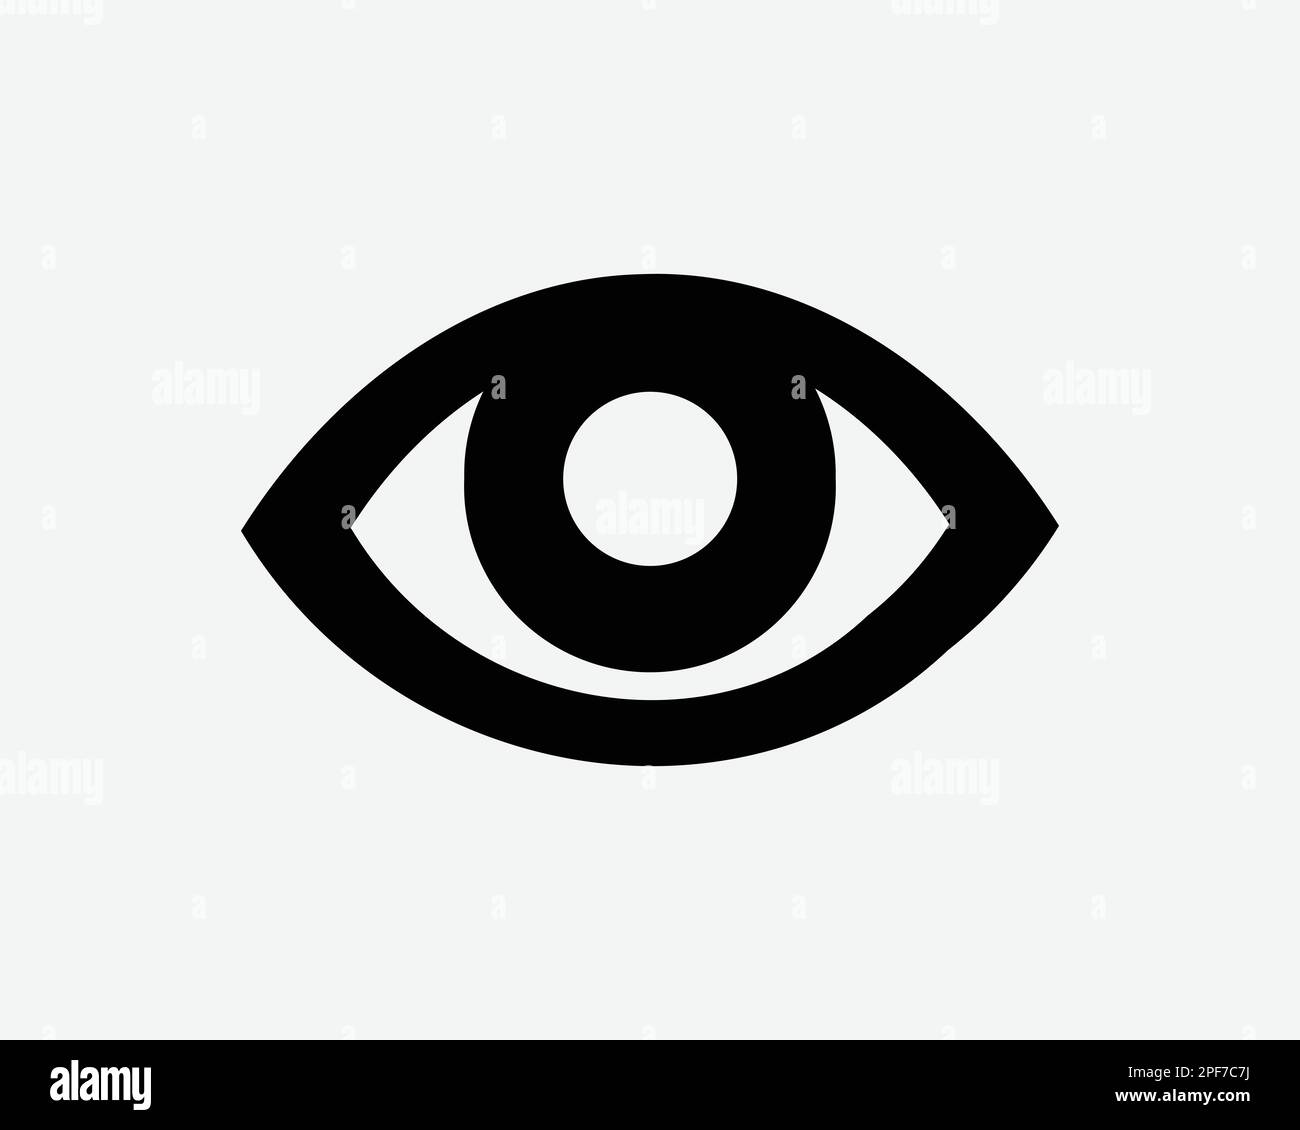 Eye Icon Sight See Seeing Eyesight Black White Silhouette Sign Symbol Vector Graphic Clipart Illustration Artwork Pictogram Stock Vector